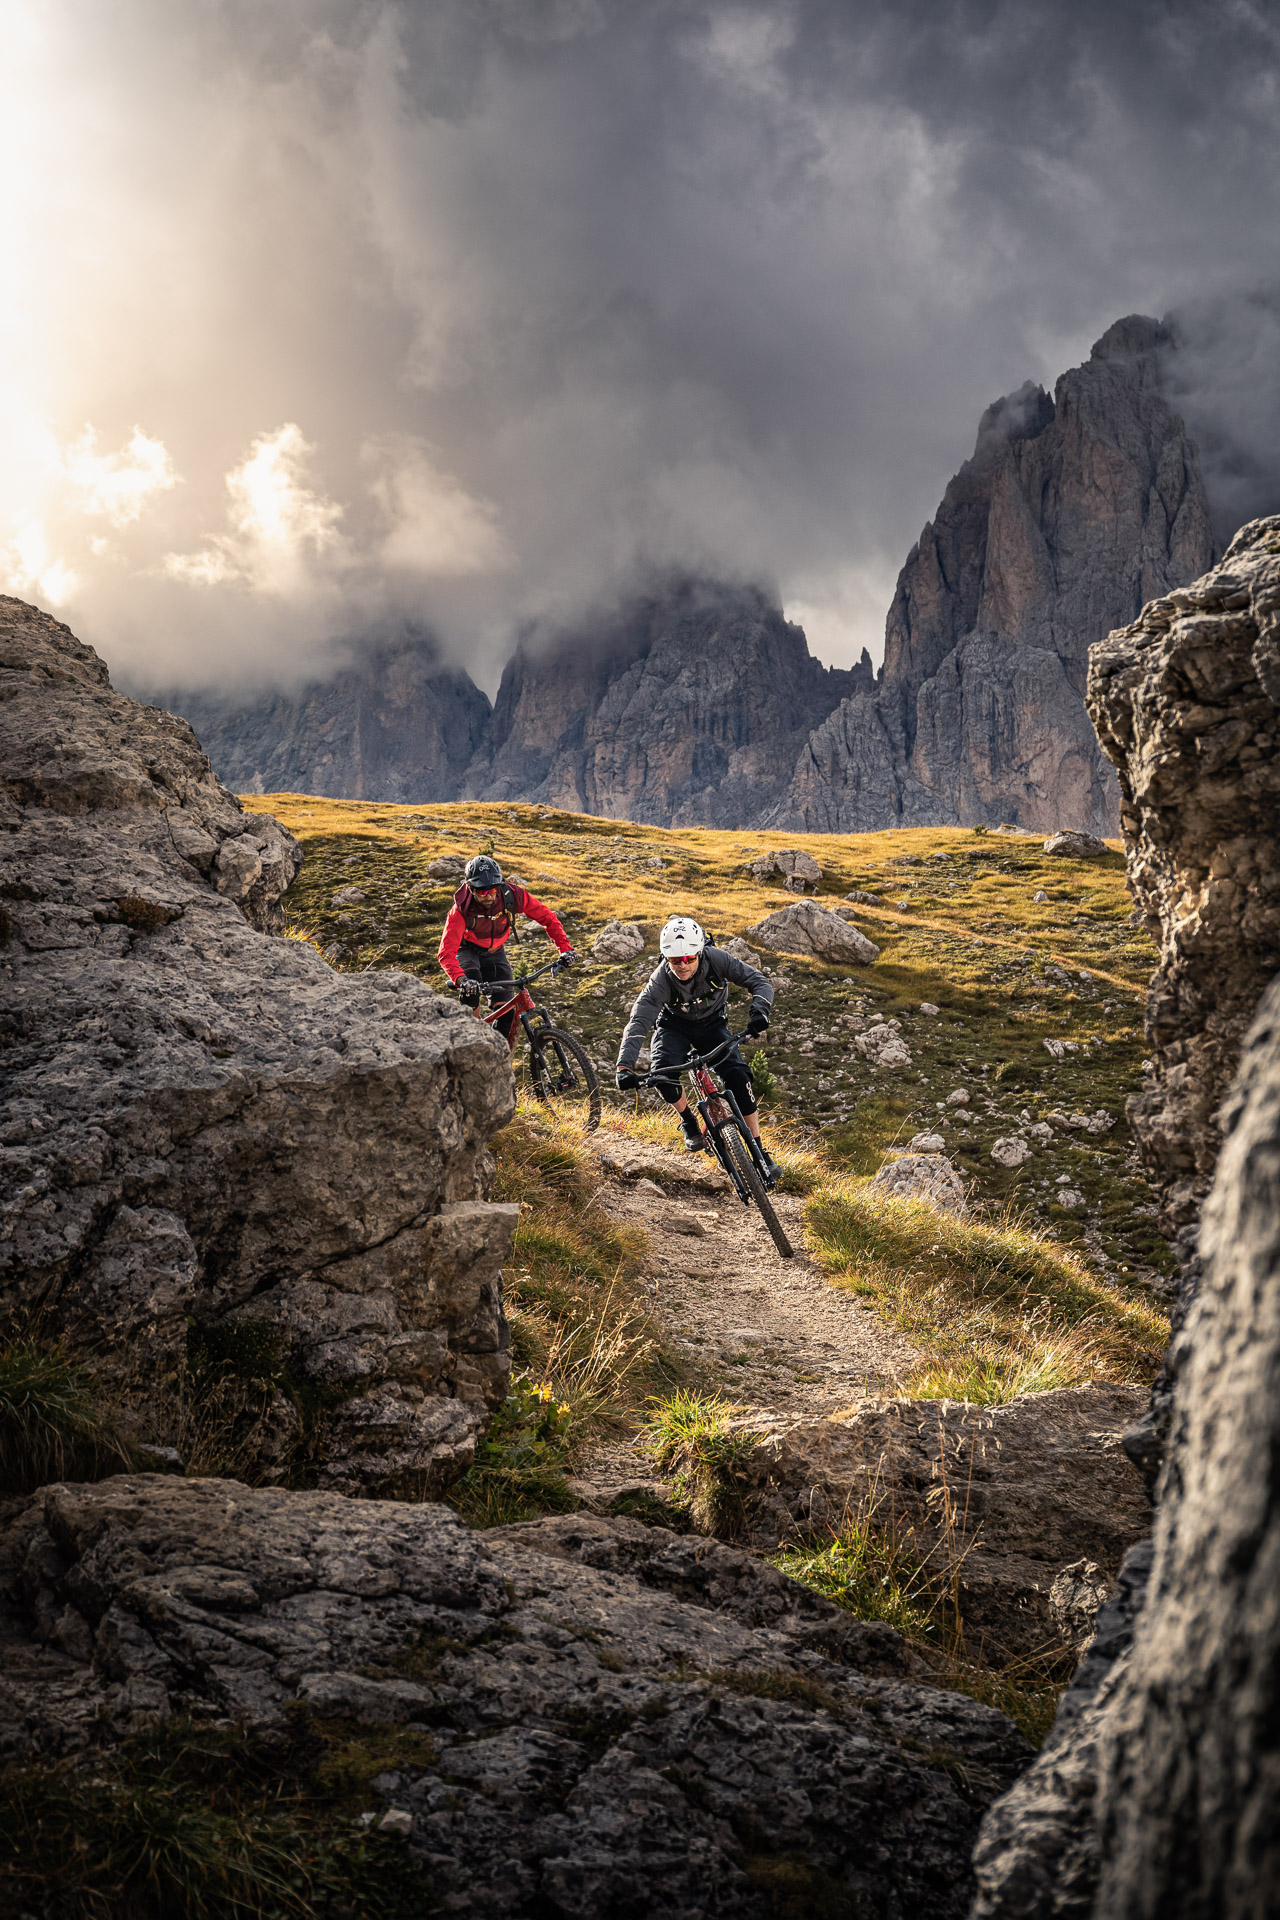 720-Protections-Passo-Sella-Dolomites-2019-_W5A1180